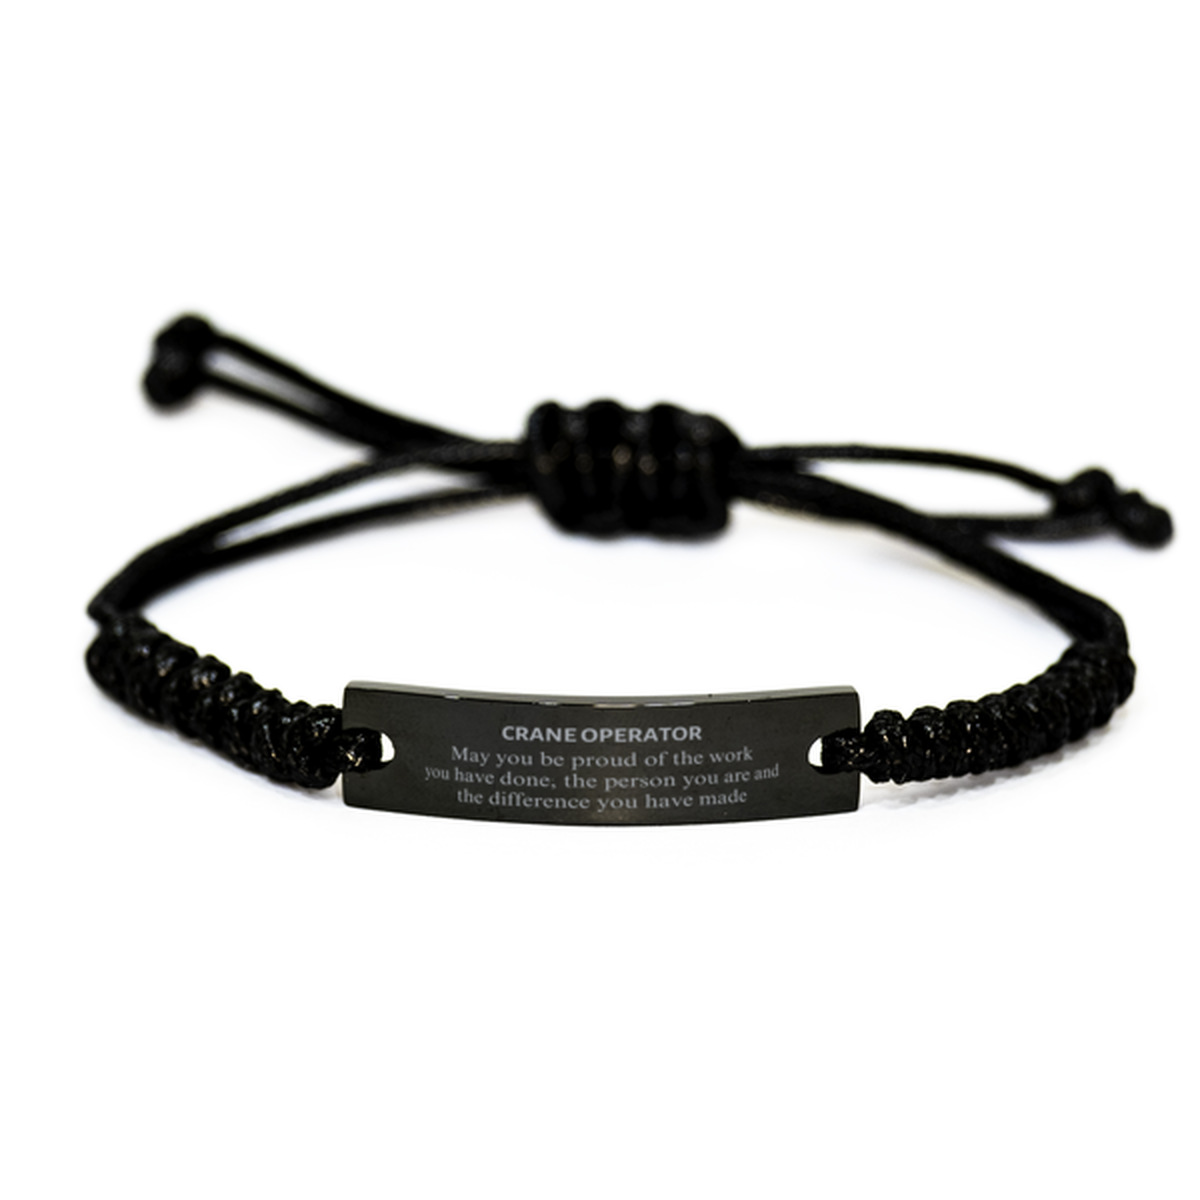 Crane Operator May you be proud of the work you have done, Retirement Crane Operator Black Rope Bracelet for Colleague Appreciation Gifts Amazing for Crane Operator